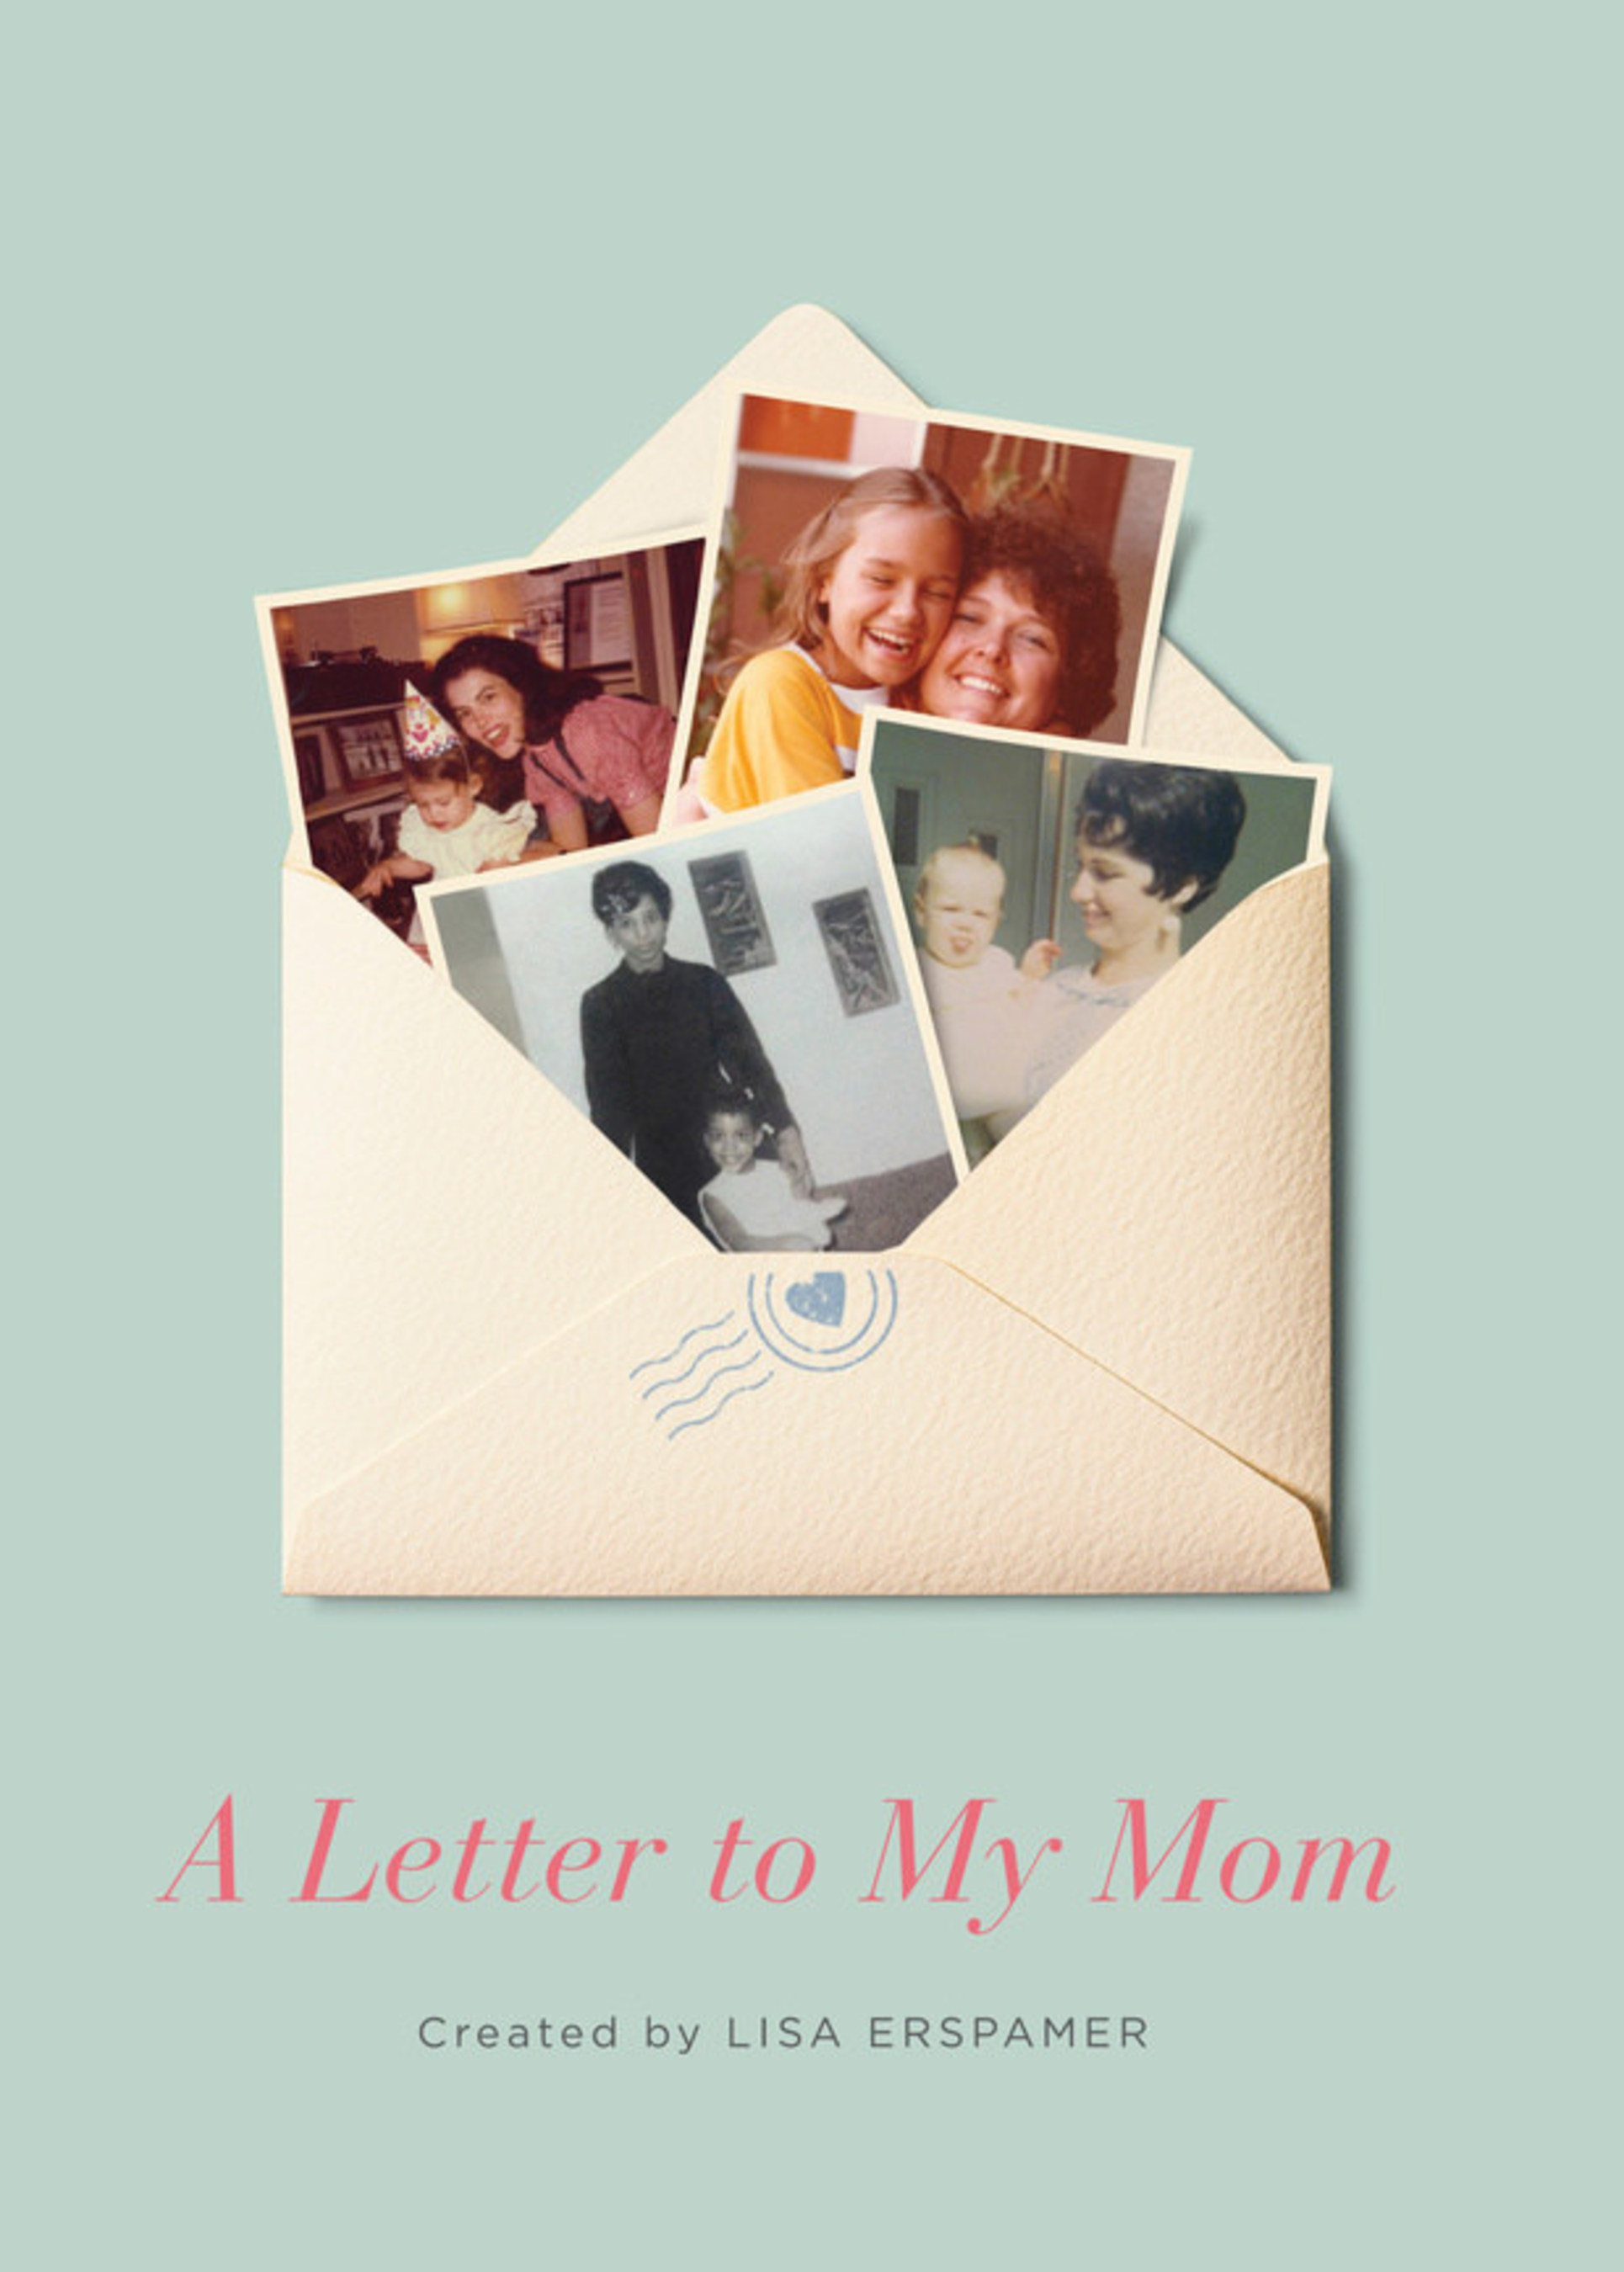 Book cover for "A Letter to My Mom" by Lisa Erspamer